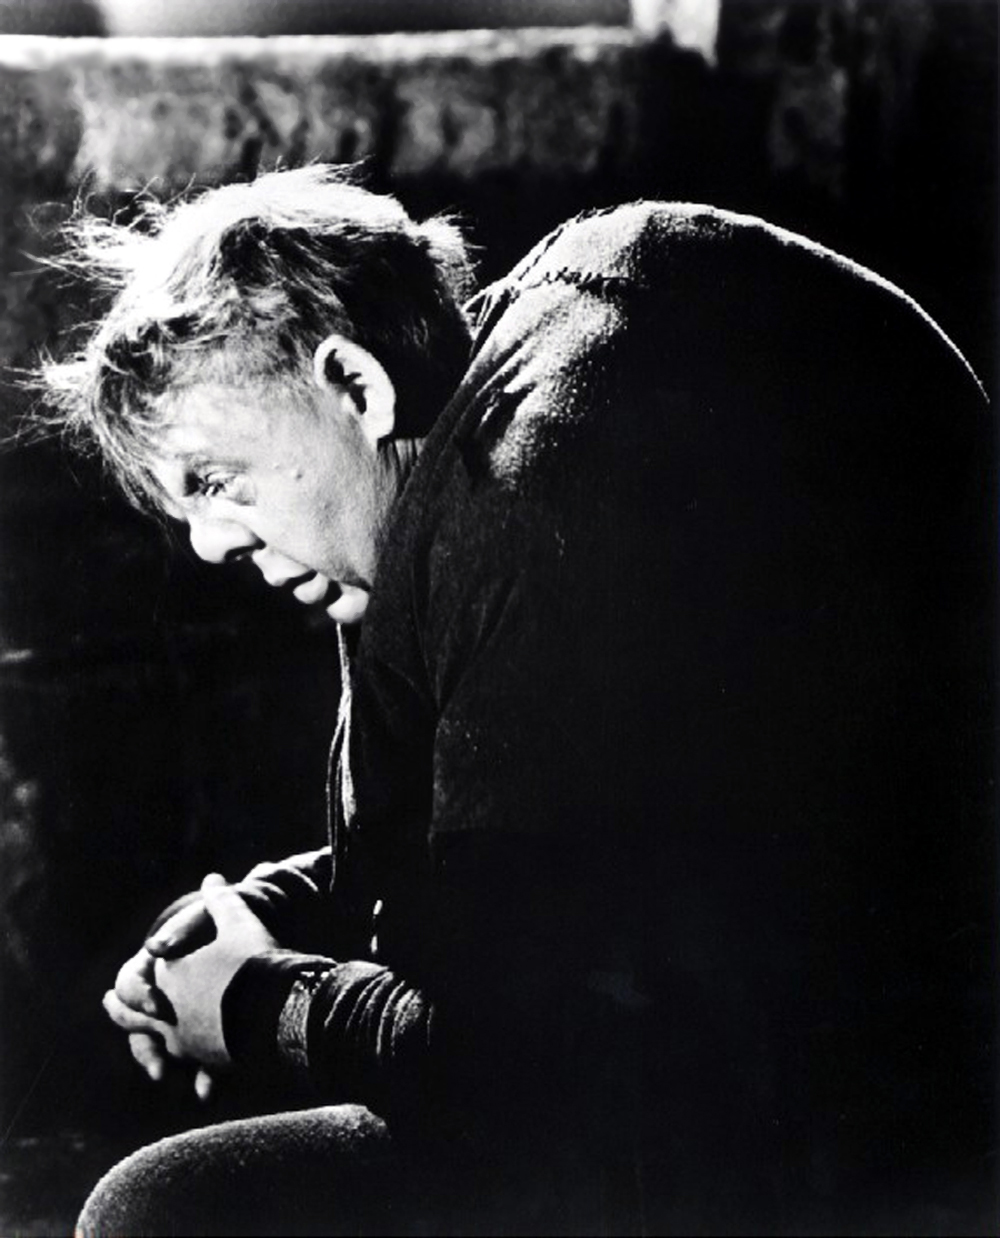 Love Those Classic Movies!!!: The Hunchback of Notre Dame (1939)